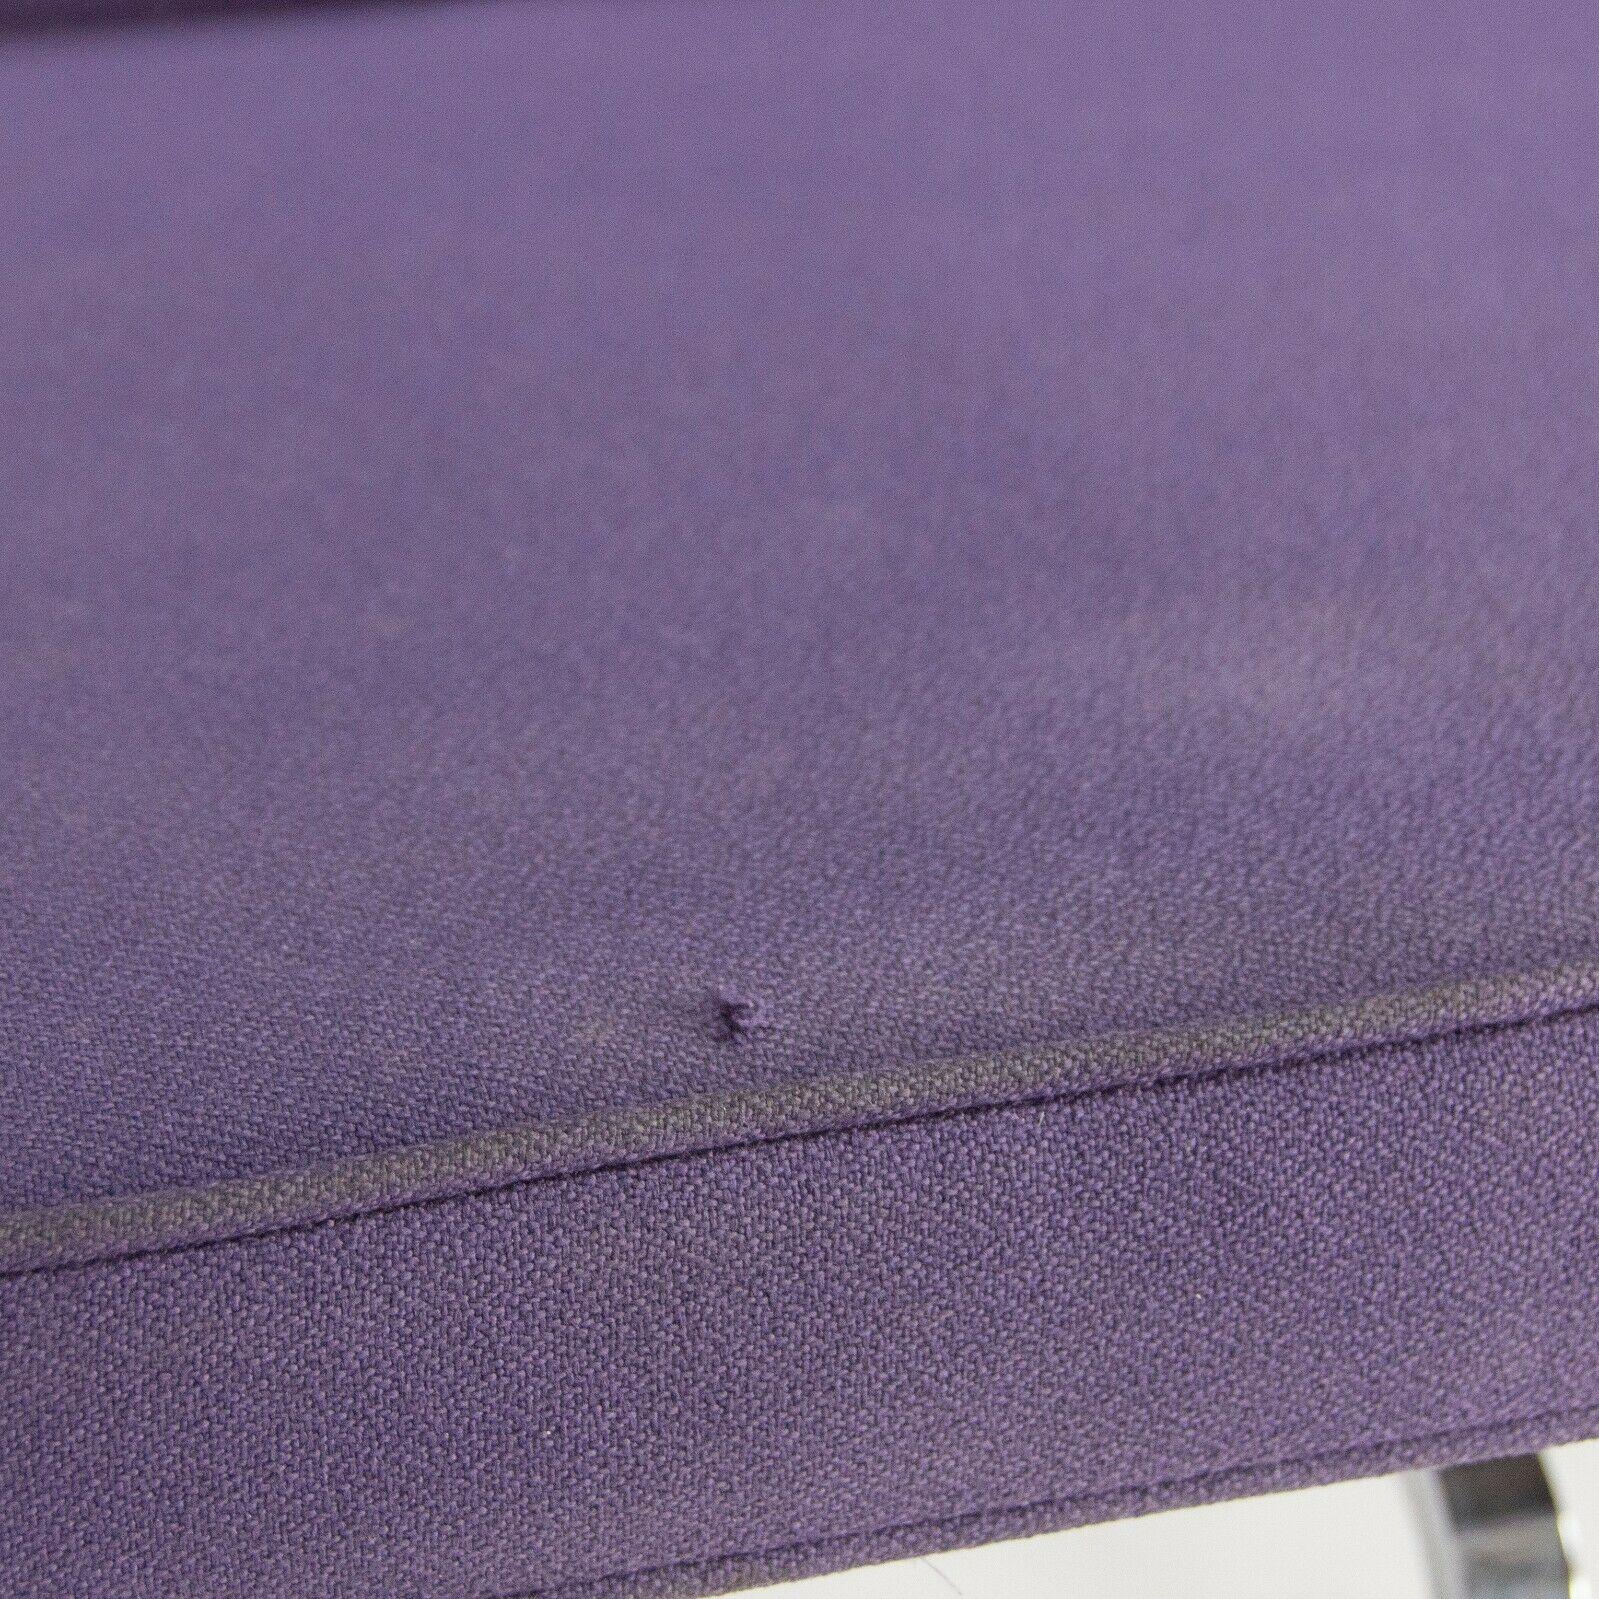 2006 Herman Miller Ray and Charles Eames Sofa Compact Purple Fabric Upholstery For Sale 2